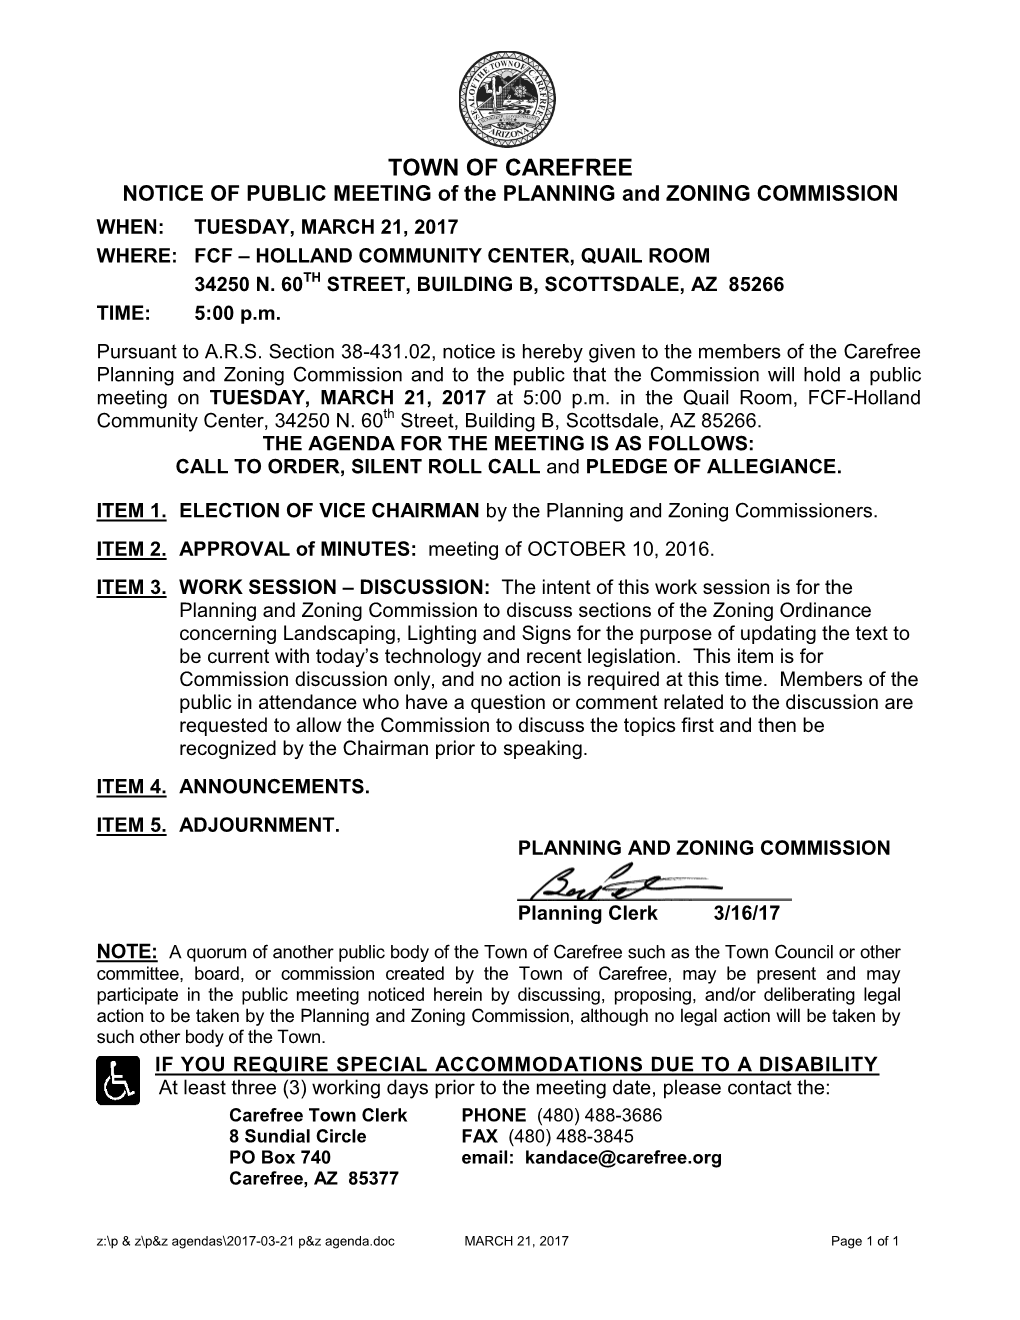 TOWN of CAREFREE NOTICE of PUBLIC MEETING of the PLANNING and ZONING COMMISSION